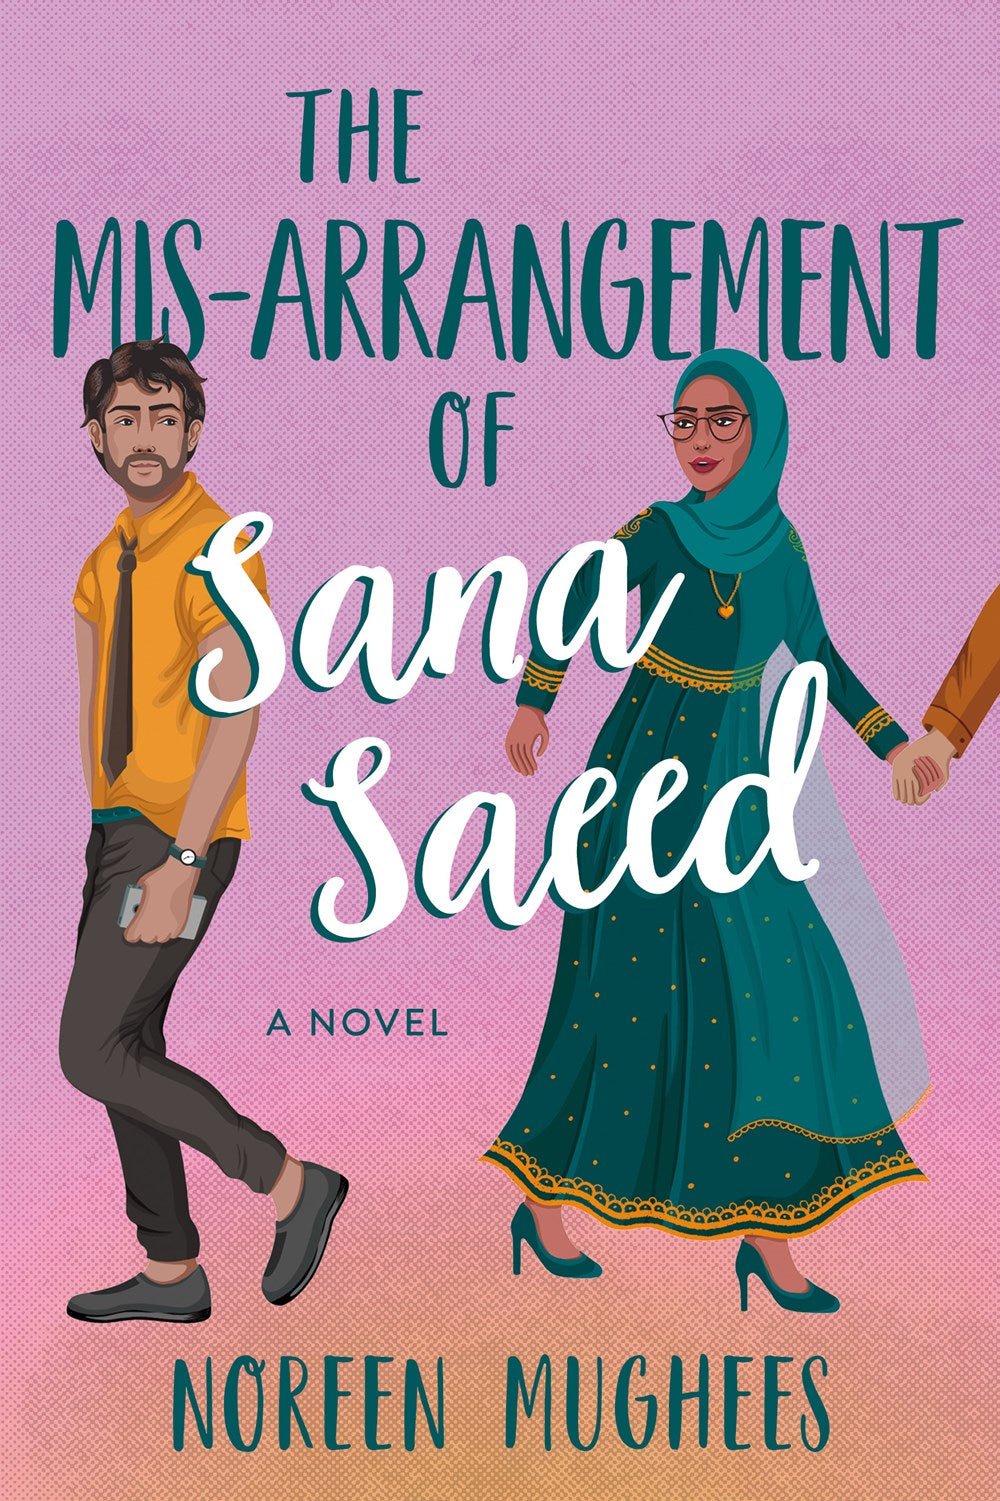 The Mis-Arrangement of Sana Saeed by Noreen Mughees (Paperback) (PREORDER)